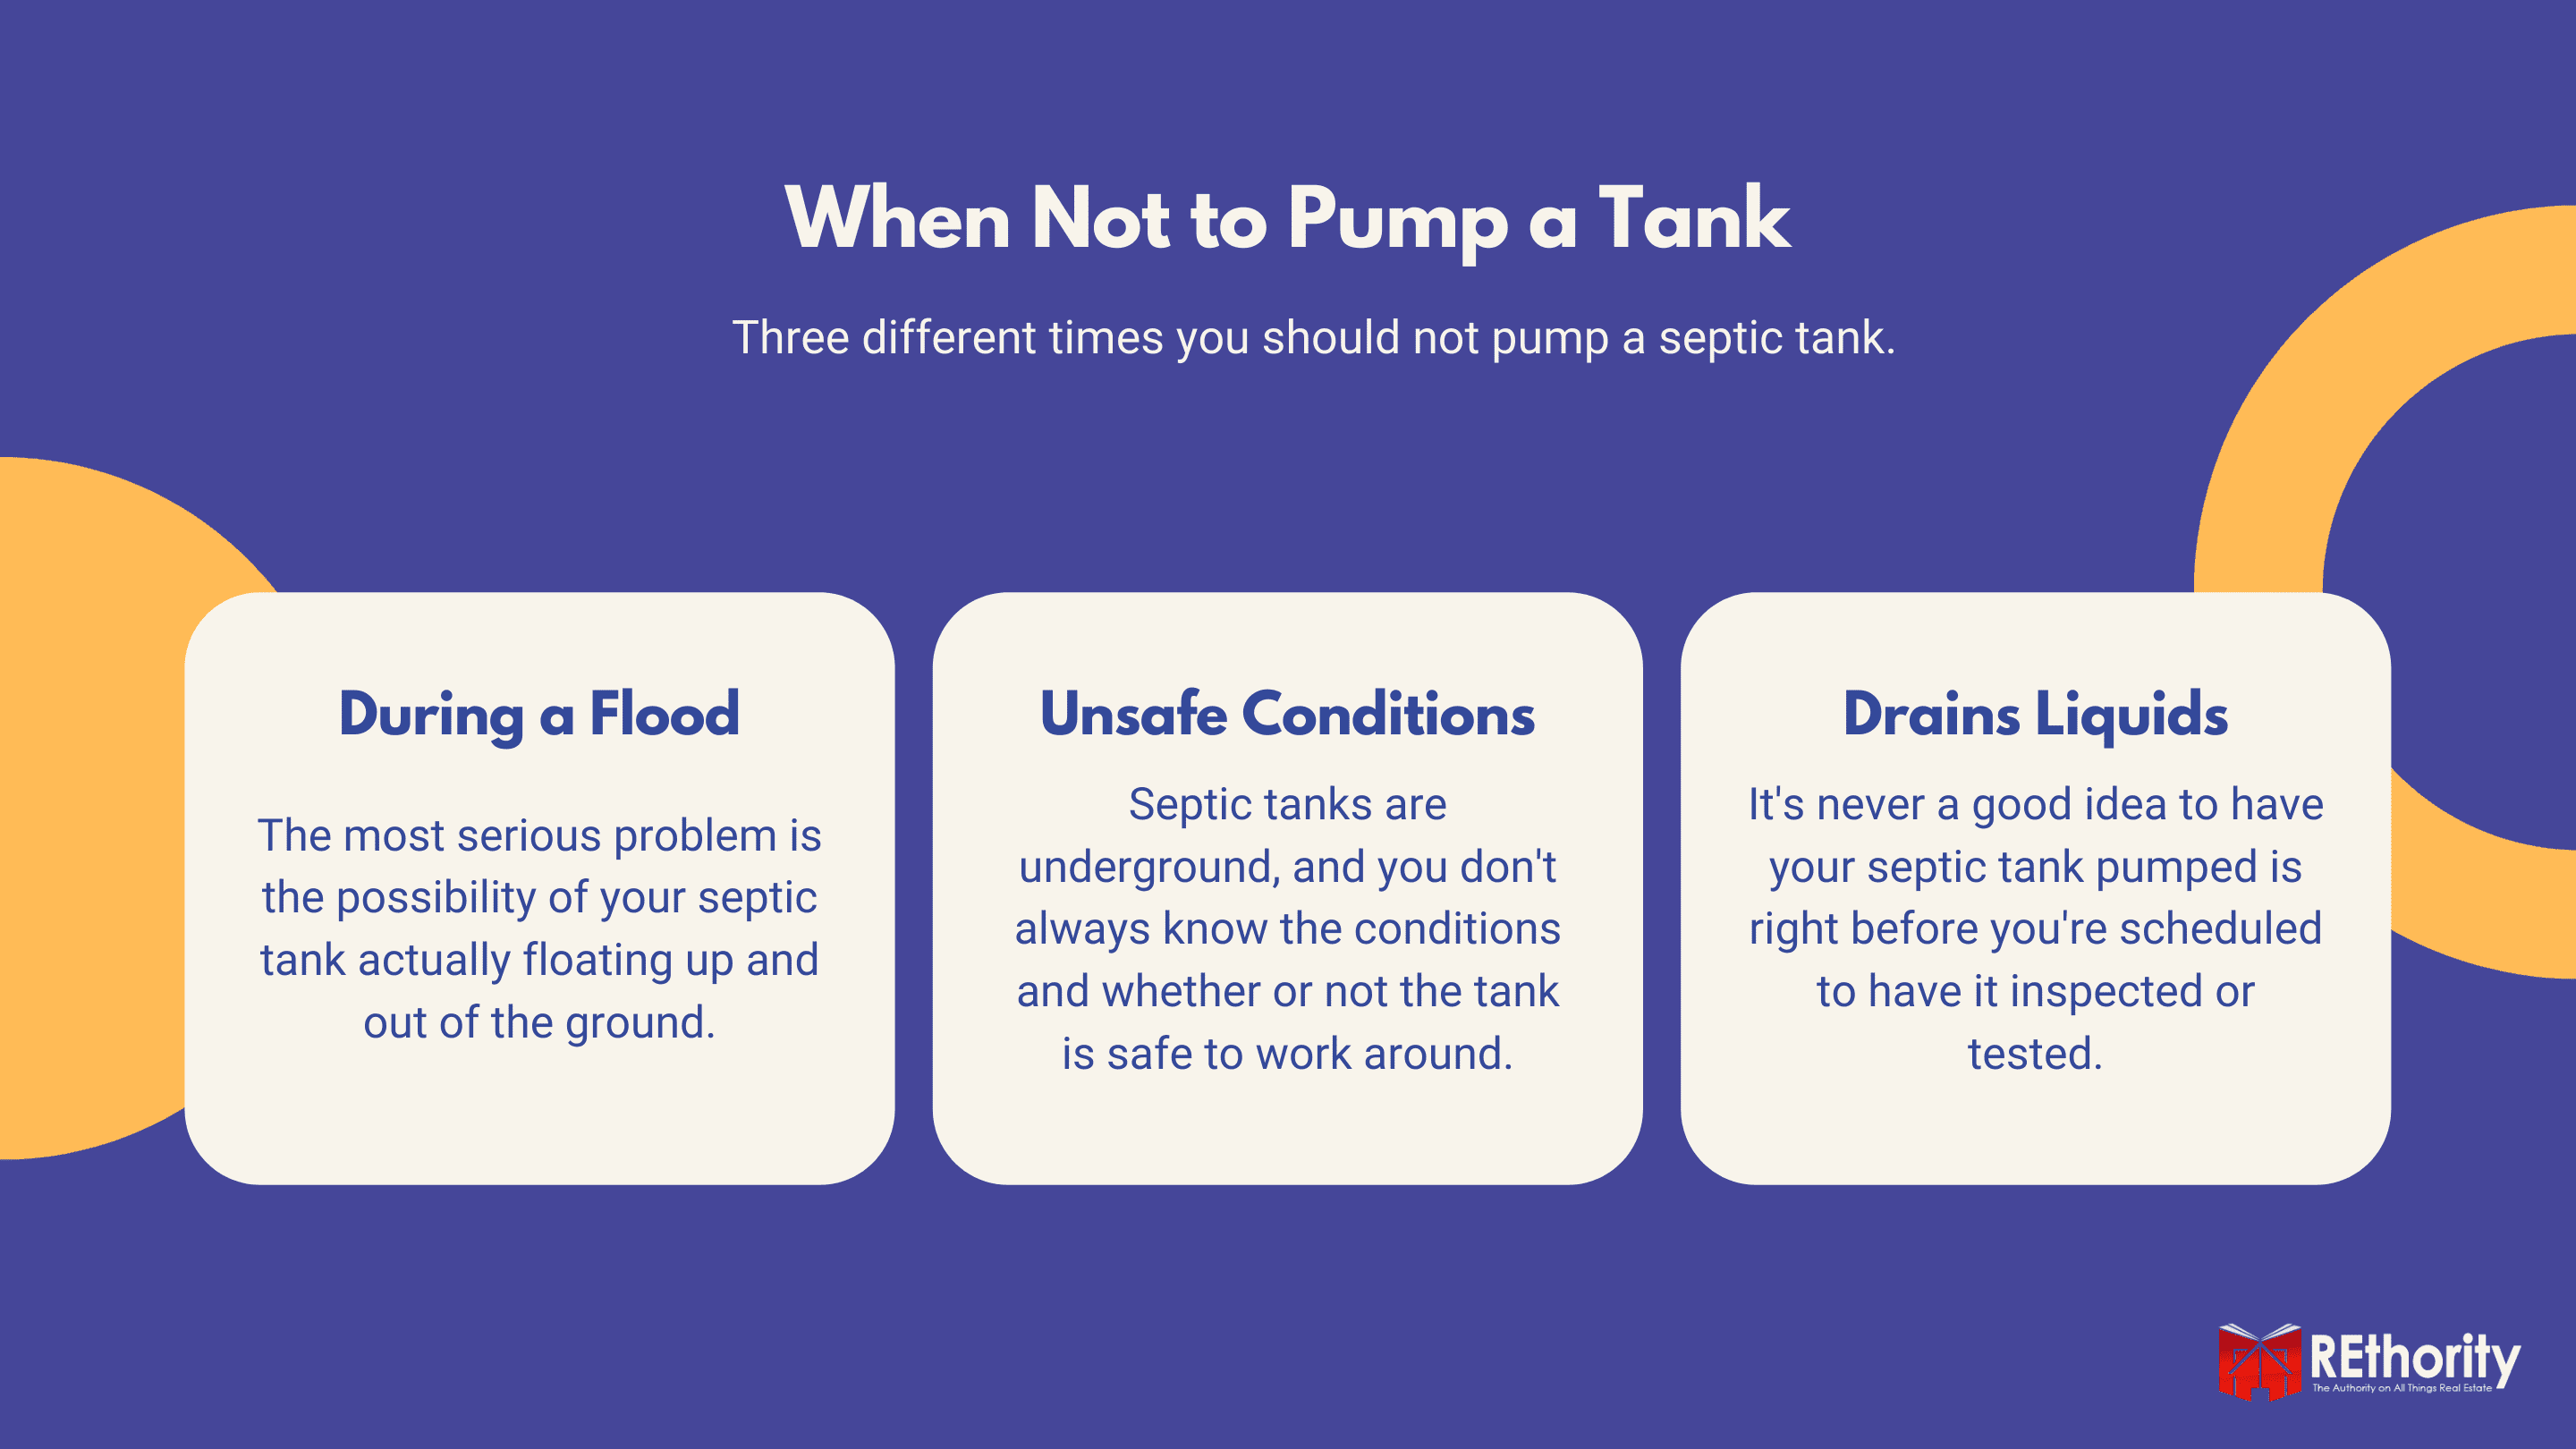 When Not to Pump a Tank graphic explaining three times it's never safe to pump a septic tank